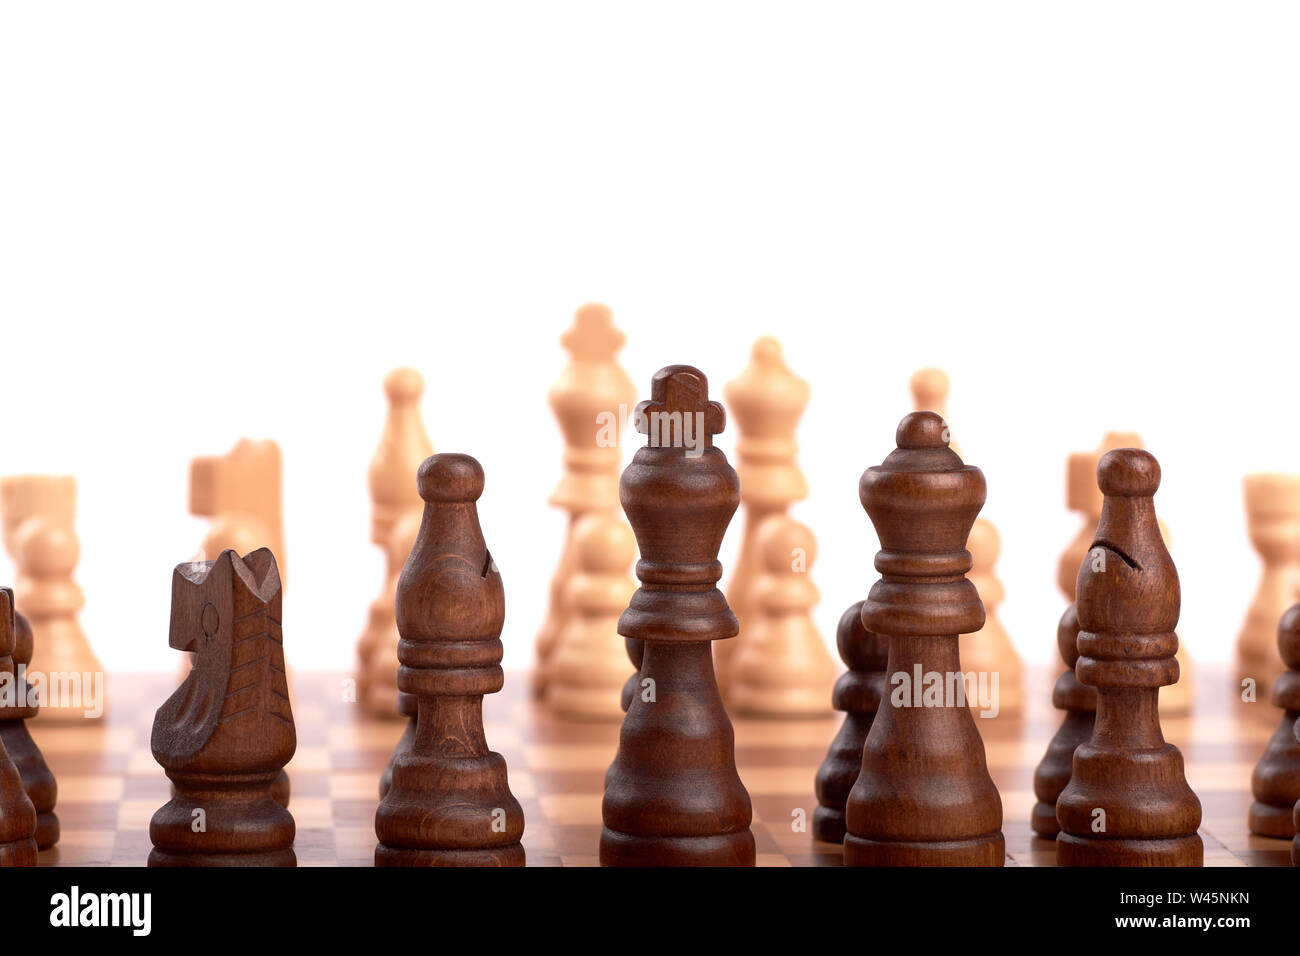 Row of white and black wooden chess pieces on a chessboard, with selective focus, isolated on white background. Stock Photo